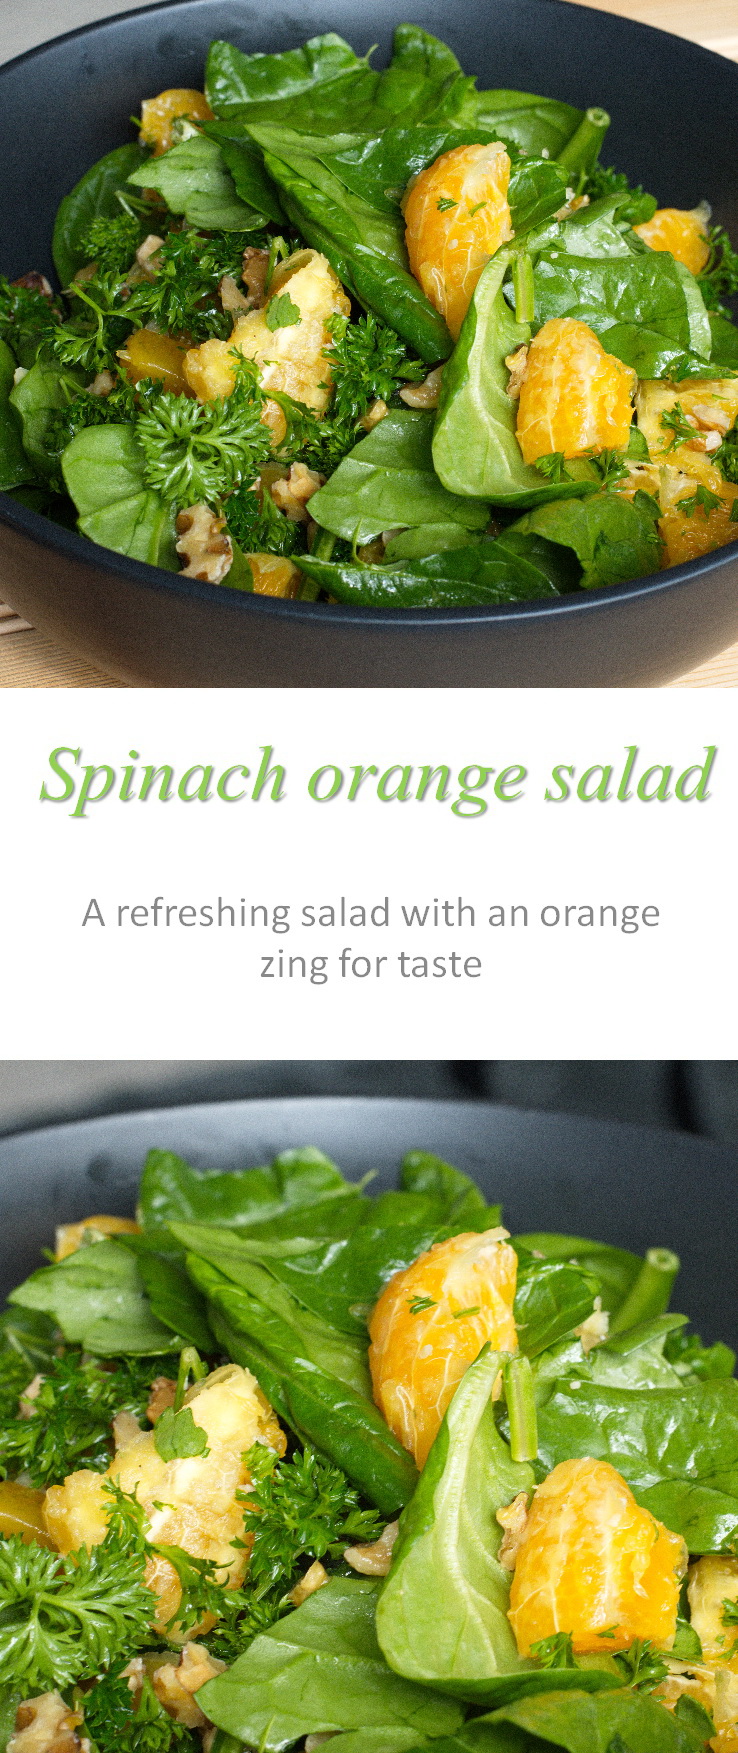 A refreshing spinach orange salad with the contrasting flavors of spinach and orange with nuts for added crunch #spinach #salad #cookathome #glutenfree #dairyfree